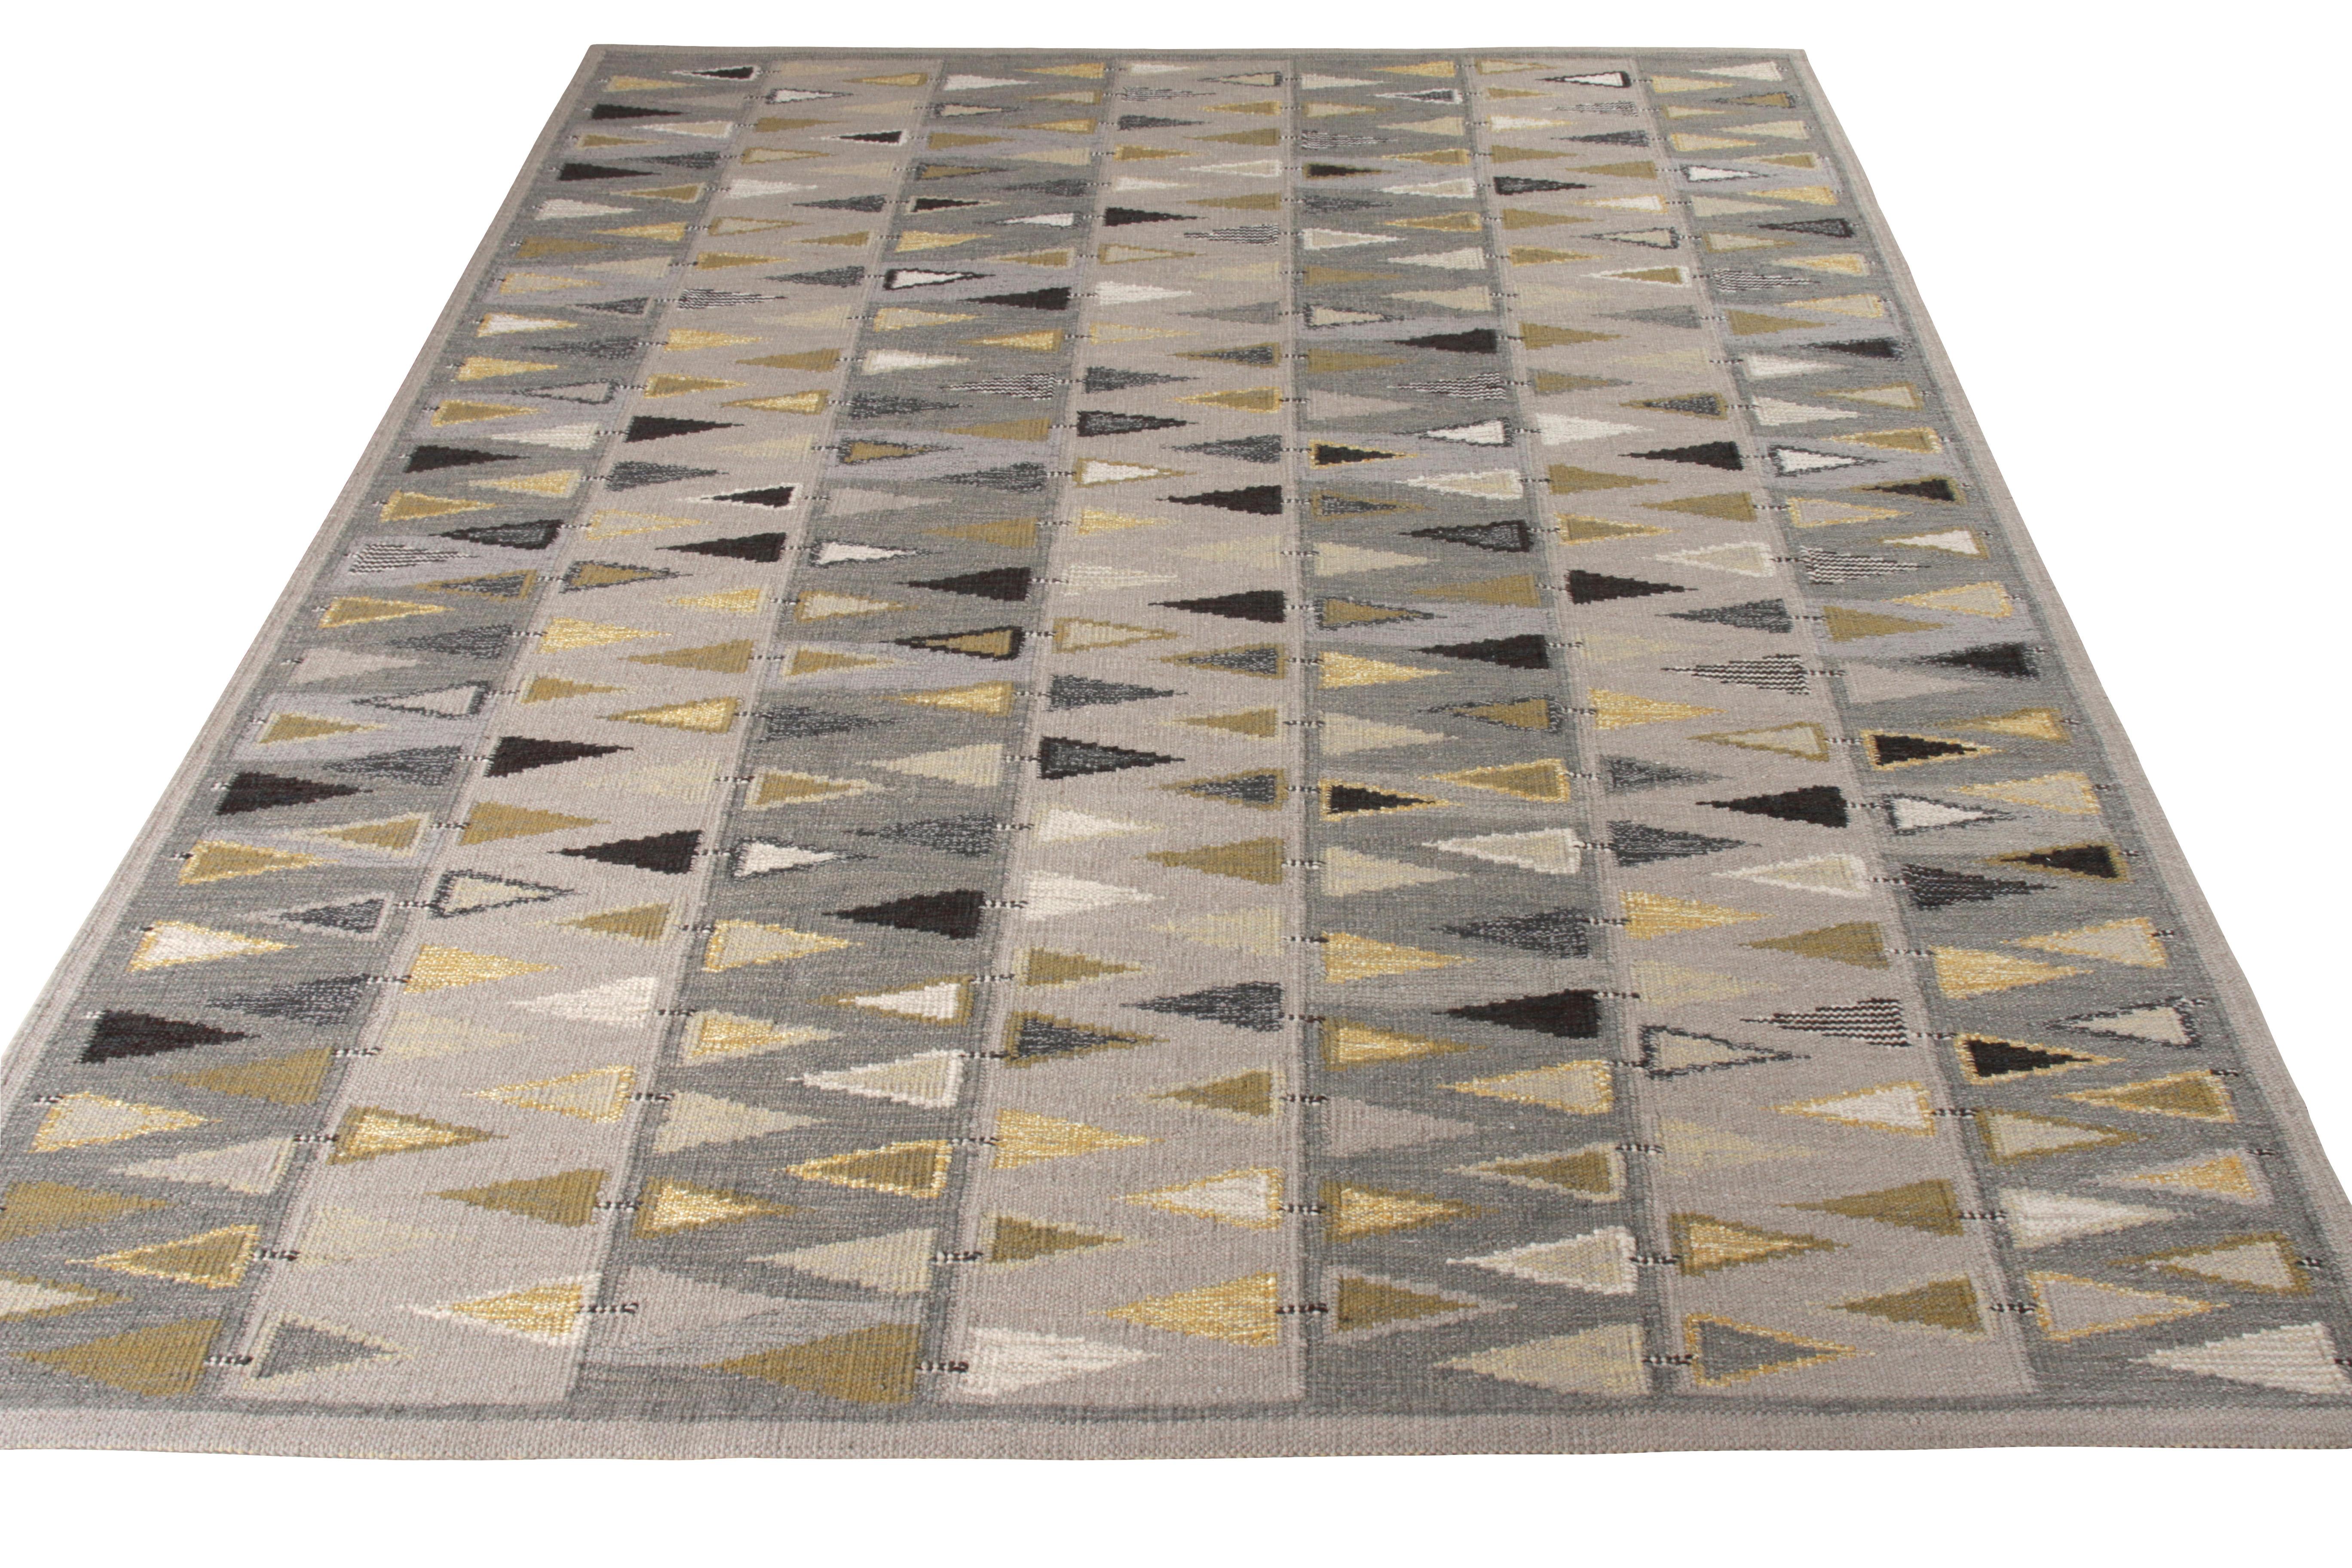 A 9 x 12 Kilim addition to Rug & Kilim’s celebrated Scandinavian Collection. This rendition of Swedish geometric style has an impeccable sense of character that runs across the weave in a matured colorway in gray with rich, playful accents. The play